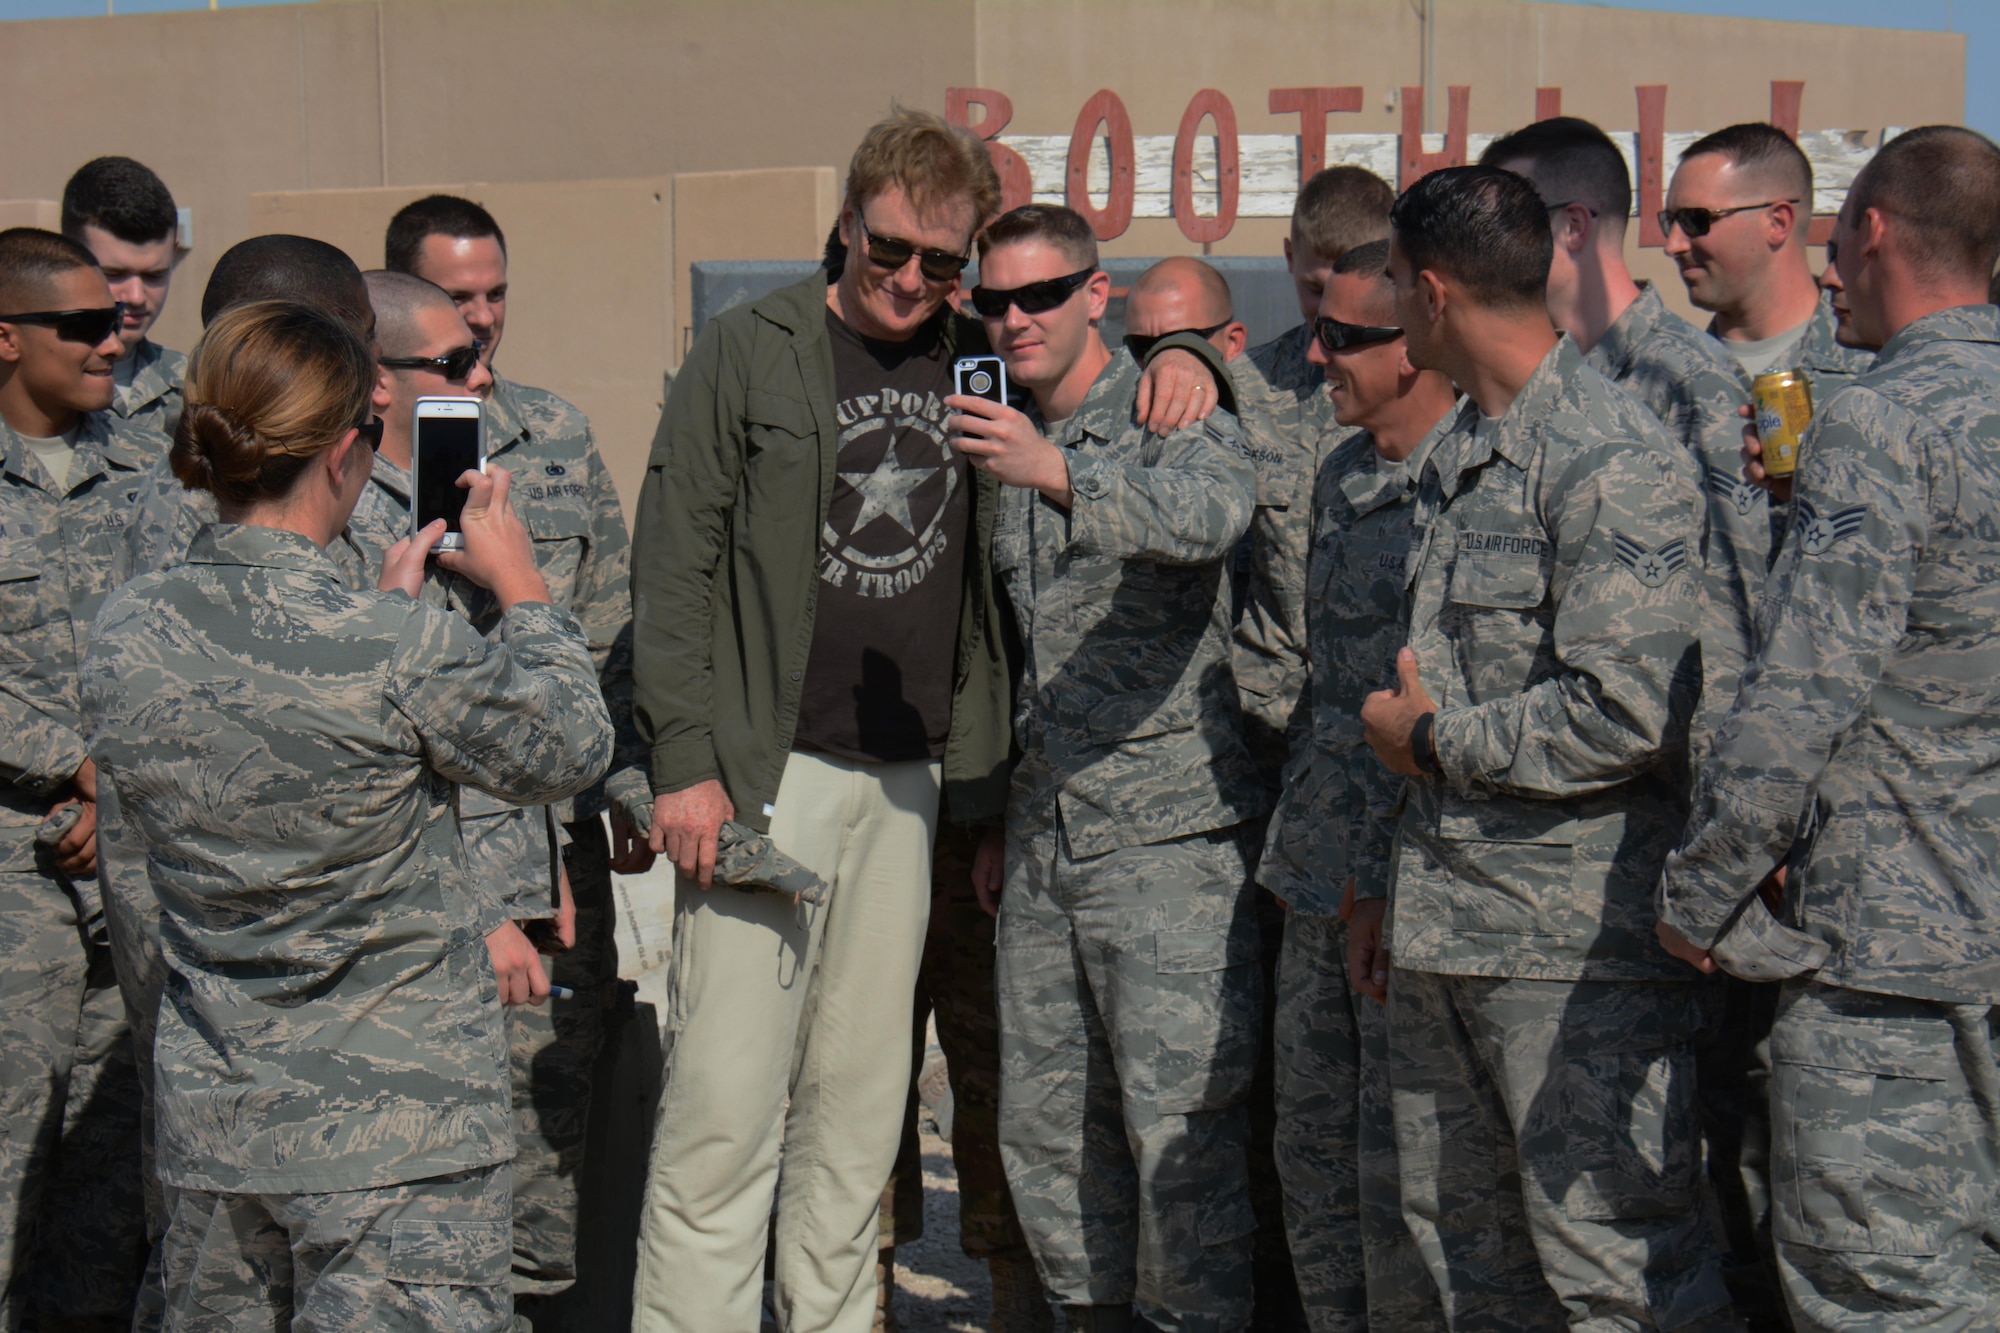 Late night talk show host and comedian, Conan O’Brien, poses for photos with several airmen at Al Udeid Air Base, Qatar Nov. 4. O’Brien visited AUAB to meet with and entertain service members. He said he was honored to visit with America’s warriors and thanked all service members for what they do to defend America’s freedom. (U.S. Air Force photo by Tech. Sgt. James Hodgman)